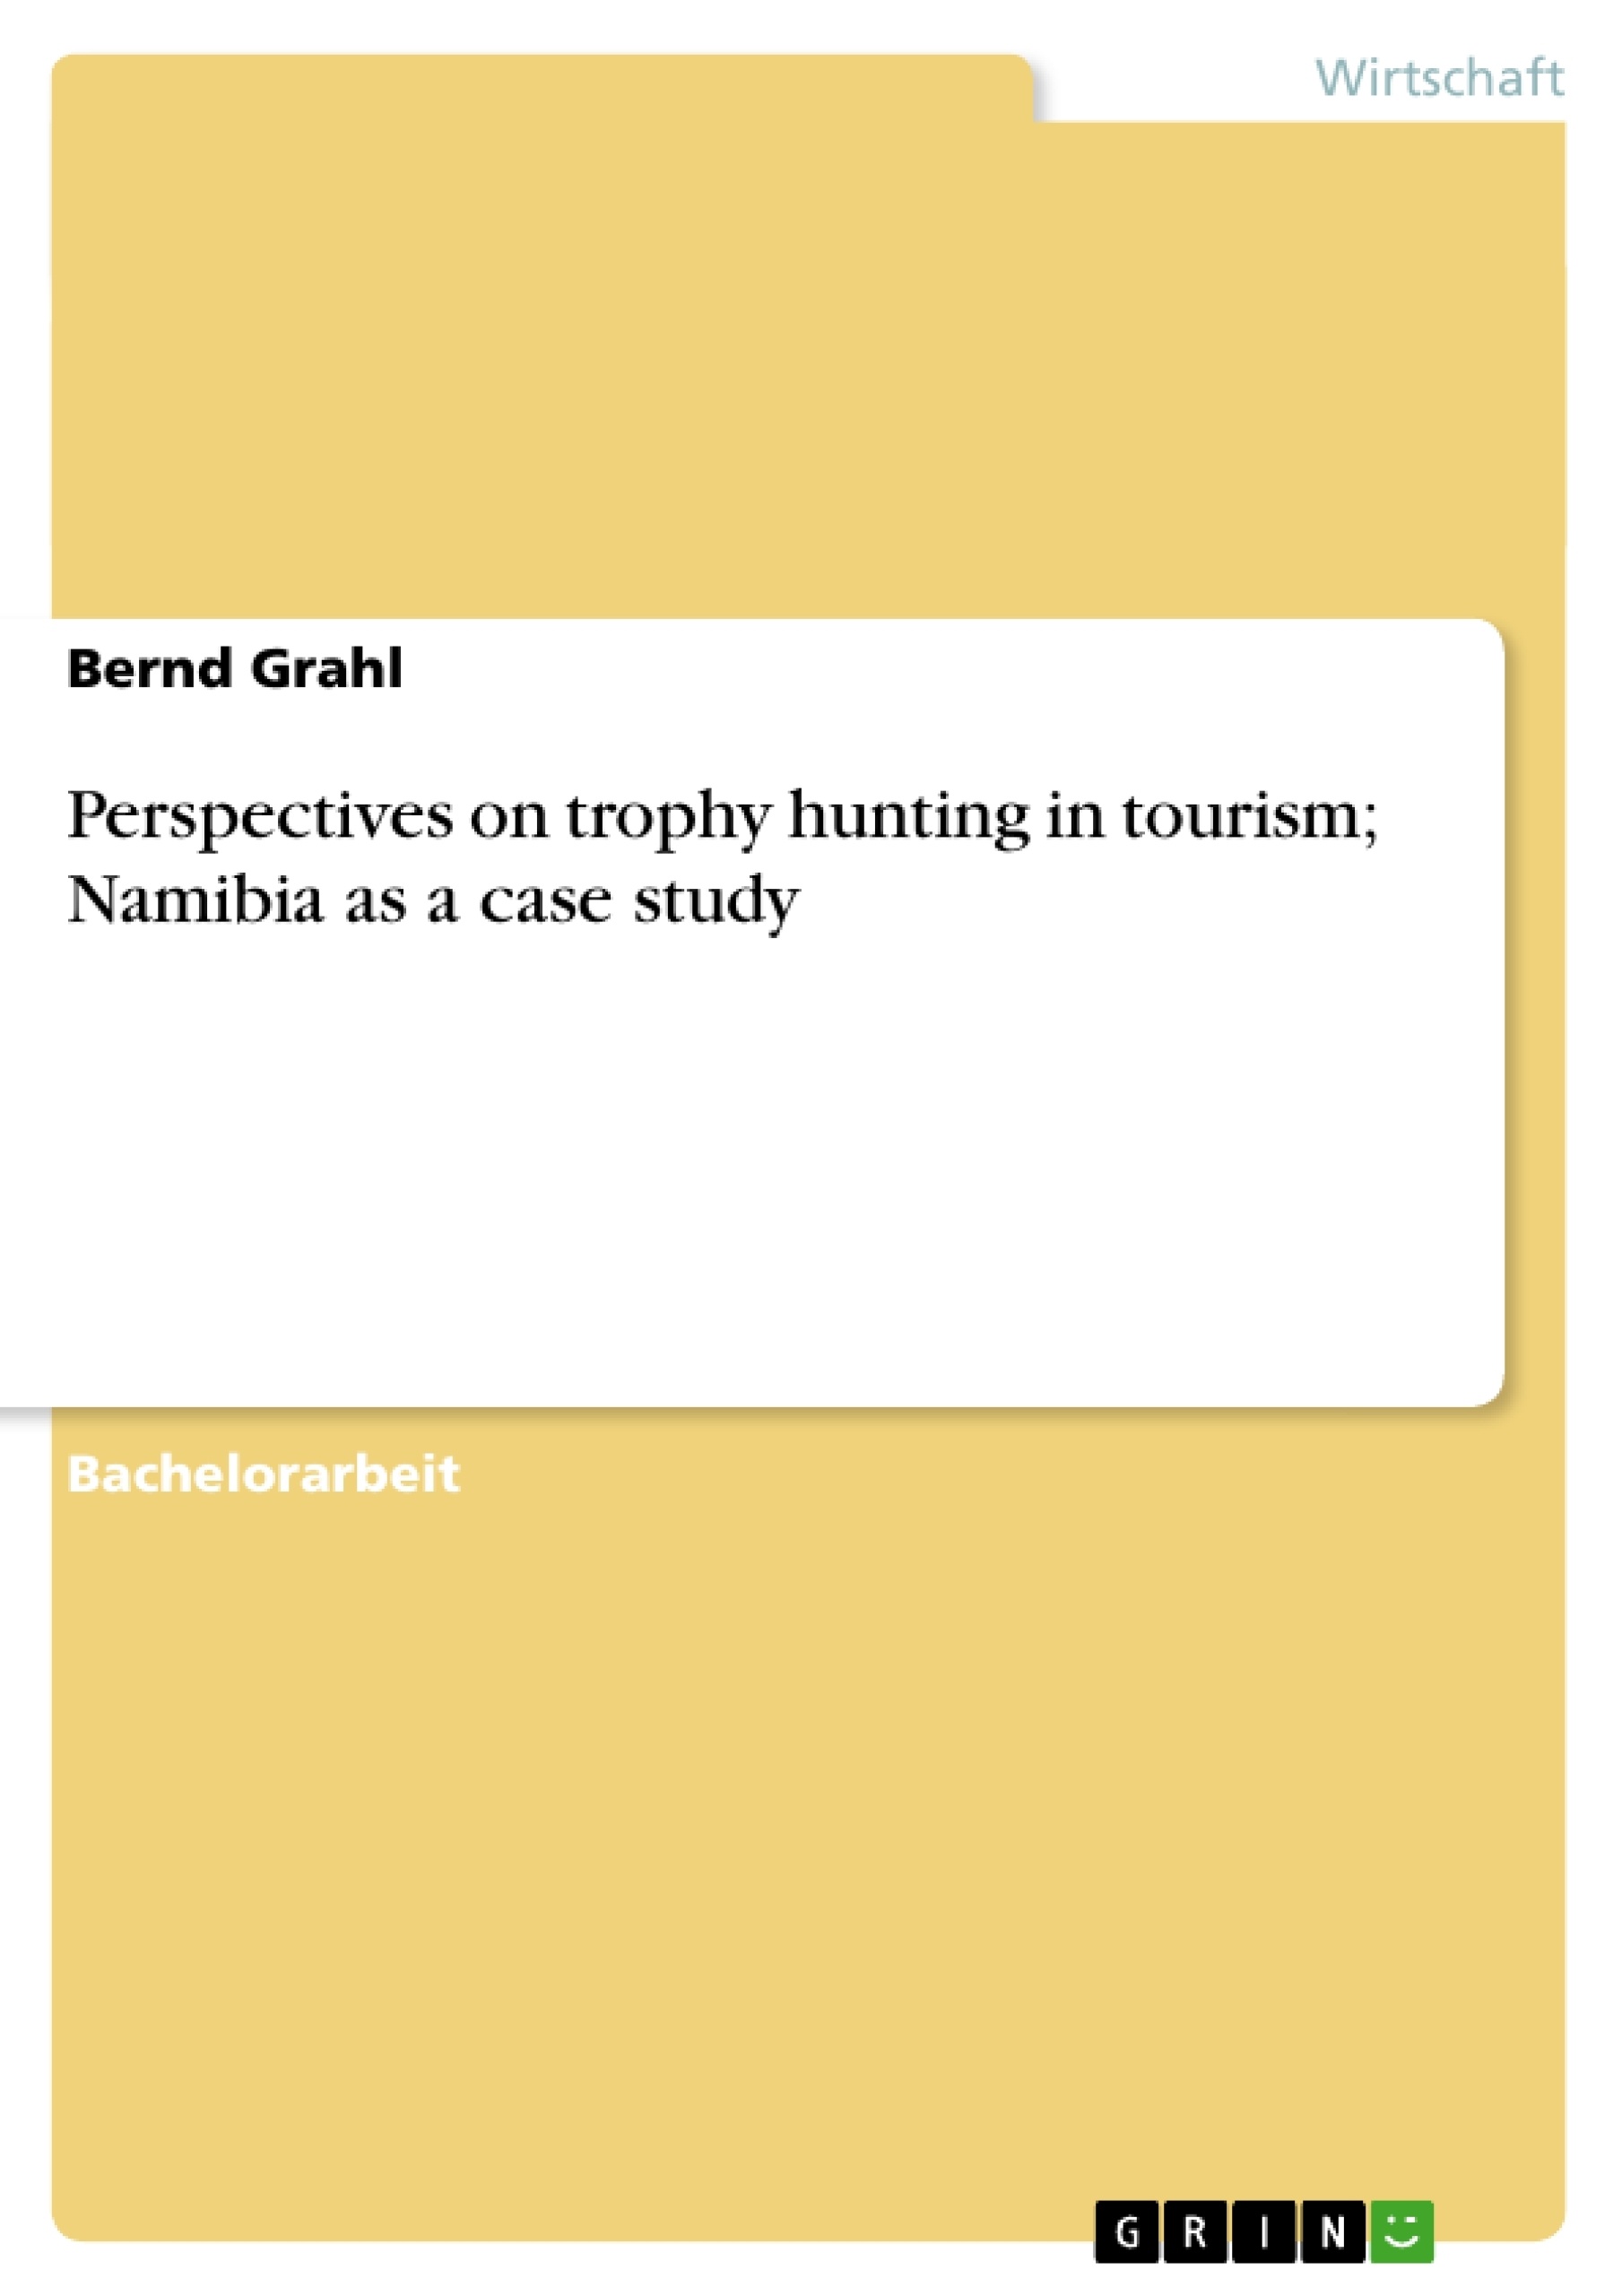 Titel: Perspectives on trophy hunting in tourism; Namibia as a case study